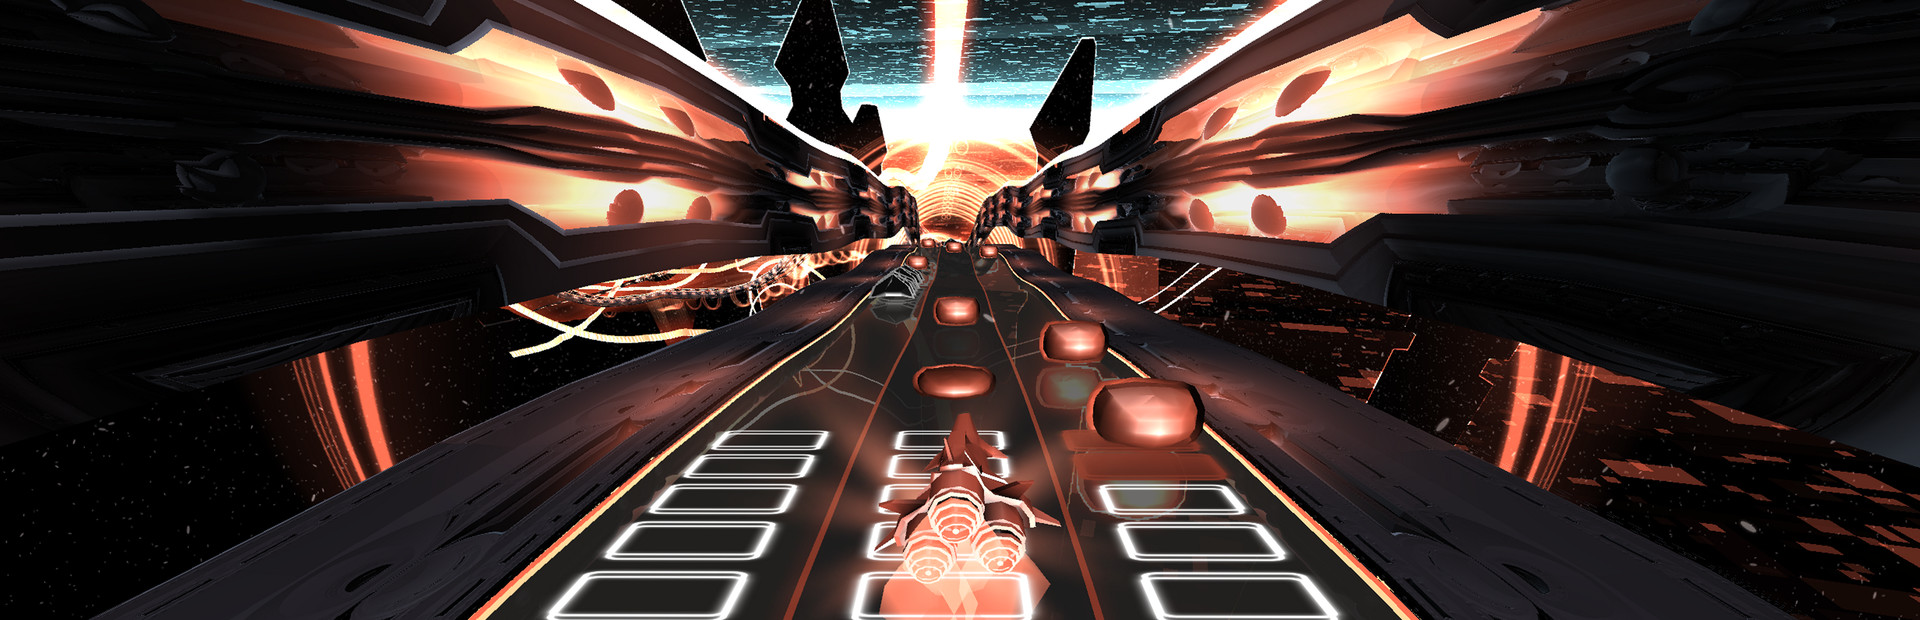 Audiosurf 2 cover image